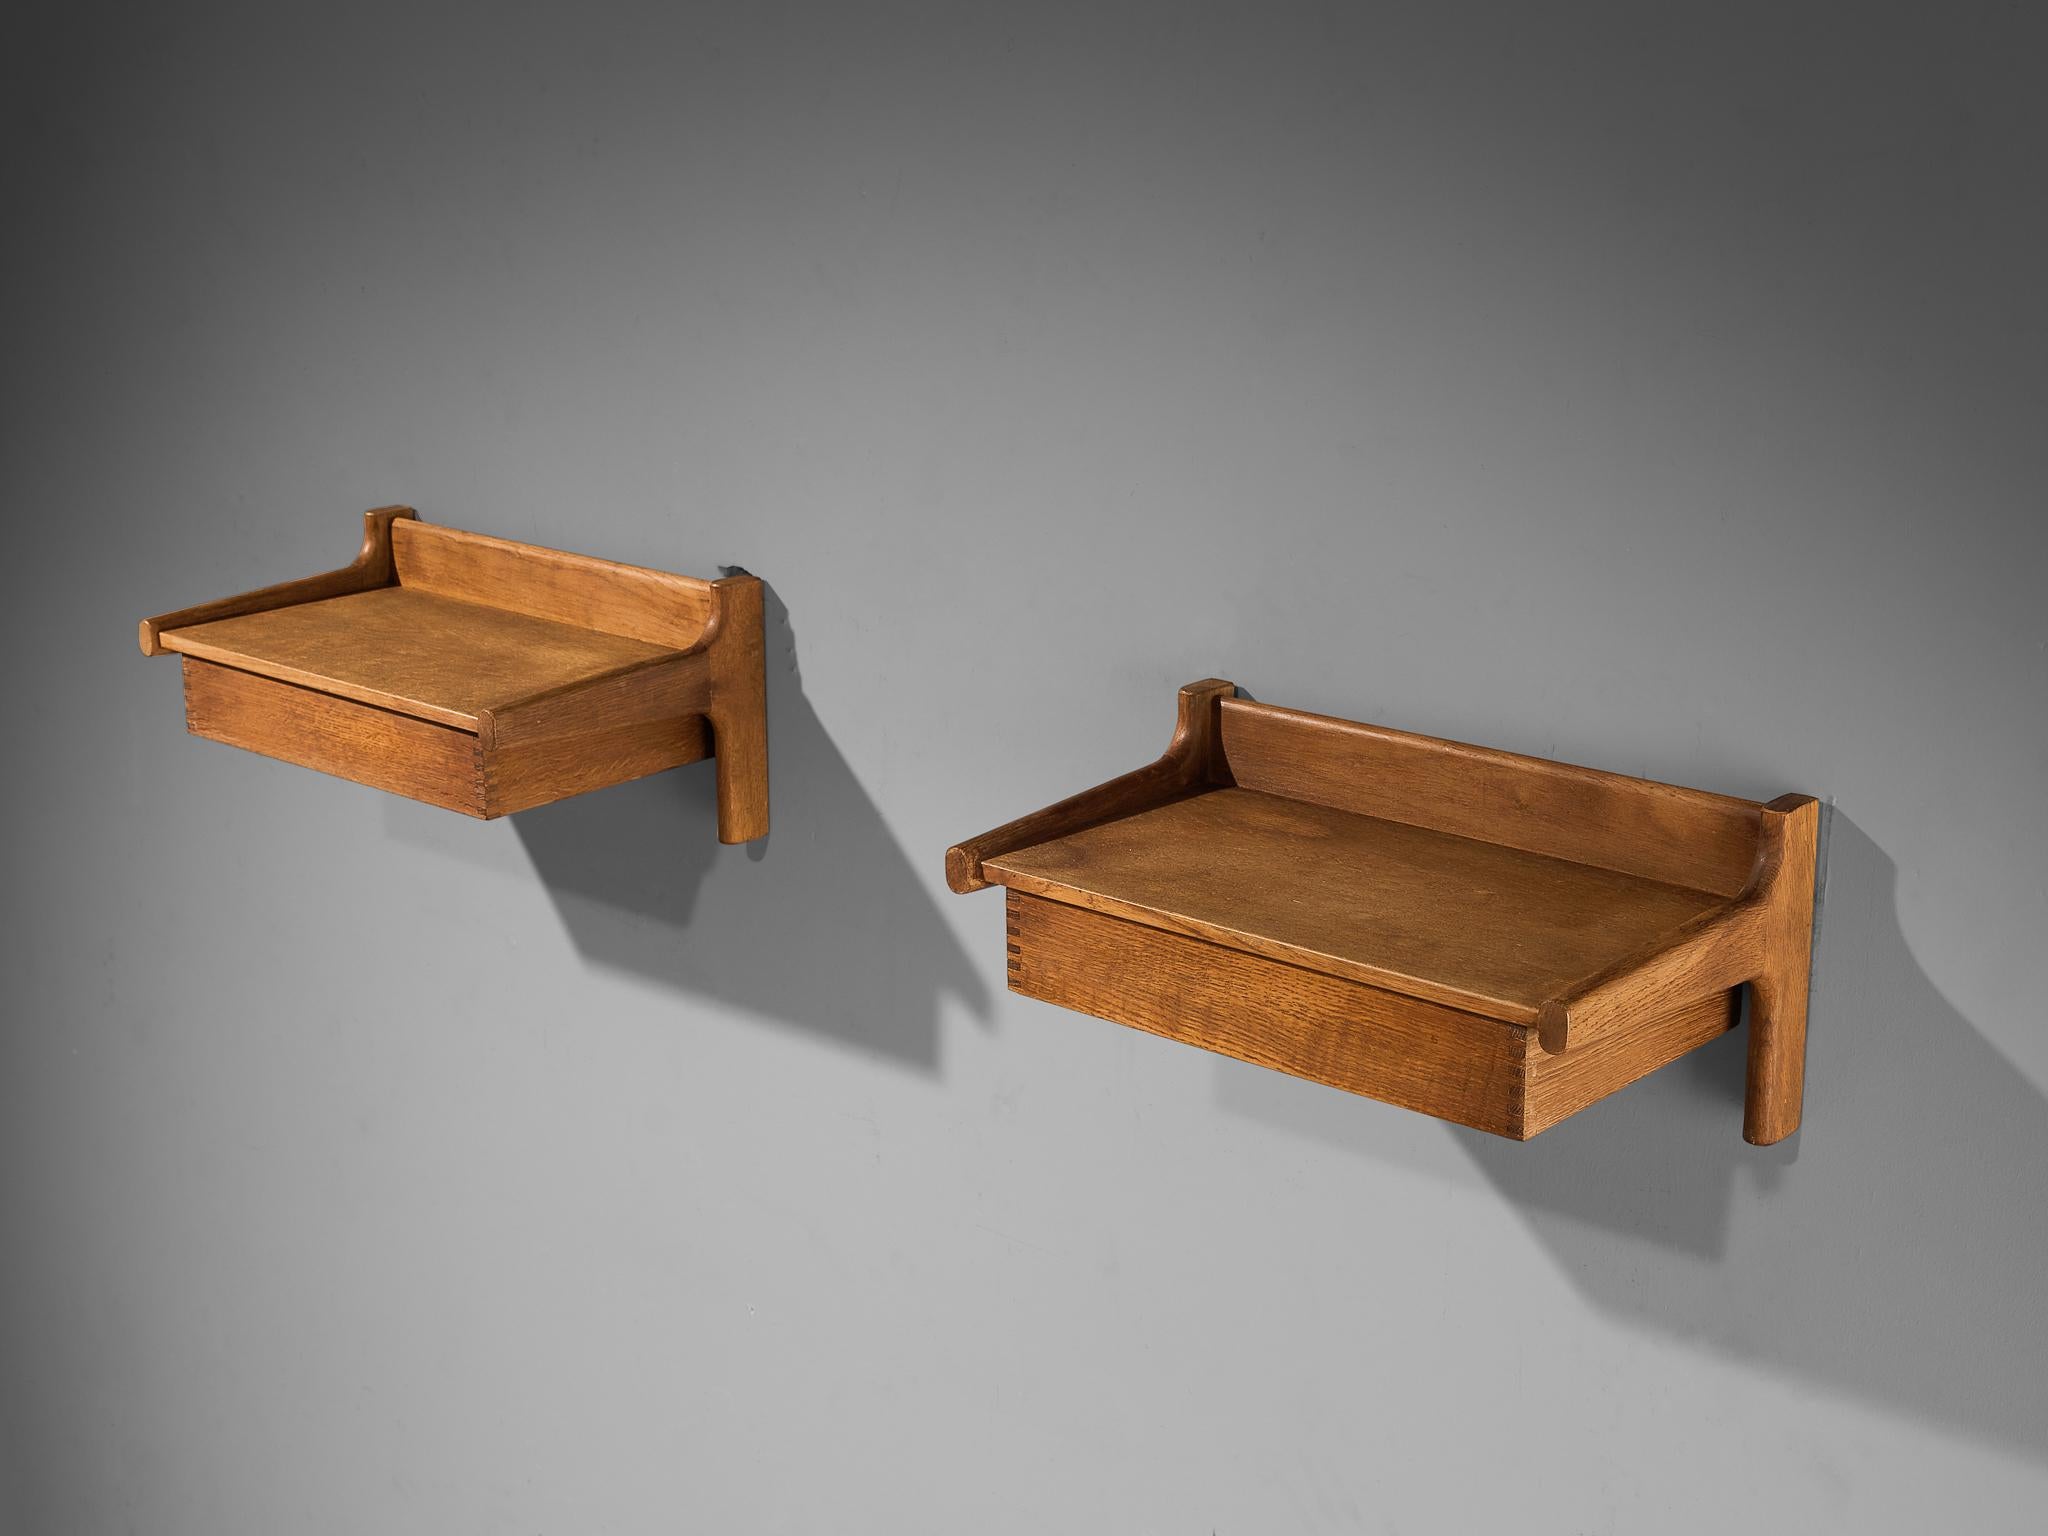 Børge Mogensen, pair of bedside shelves, oak, Denmark, 1955

This pair is well-constructed in a precise manner implementing clear lines and shapes, resulting in an eloquent and simplistic furniture piece that is typical for Danish design. In the